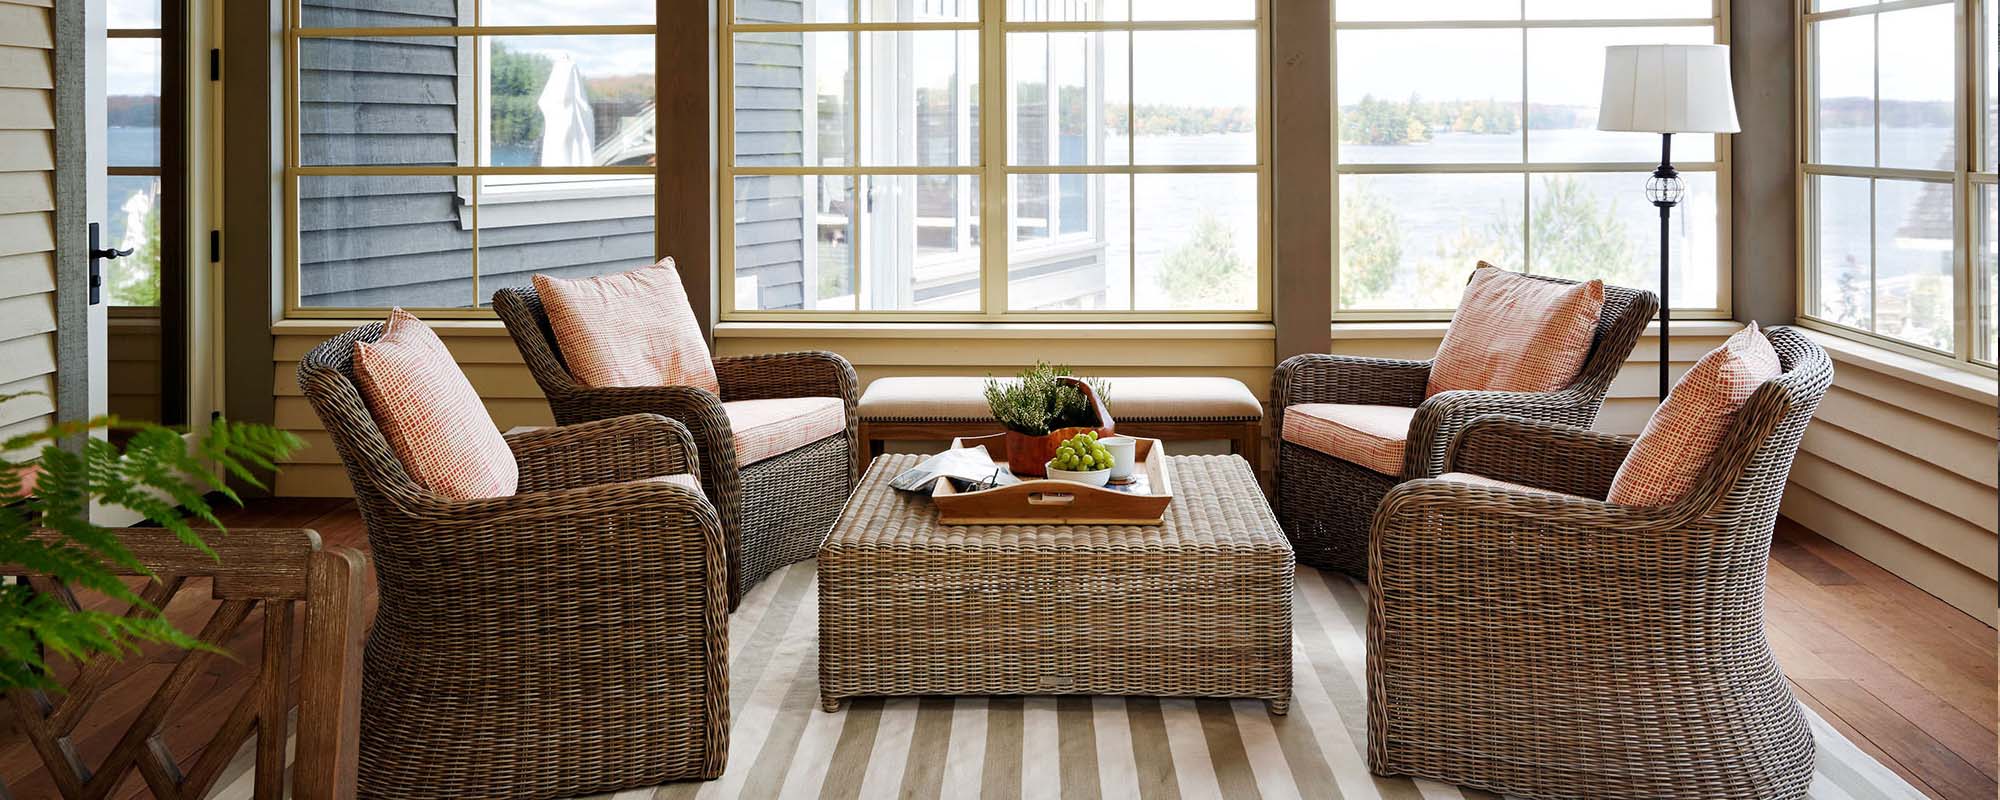 simply furnished sunroom with wicker chairs sunroom ideas on a budget